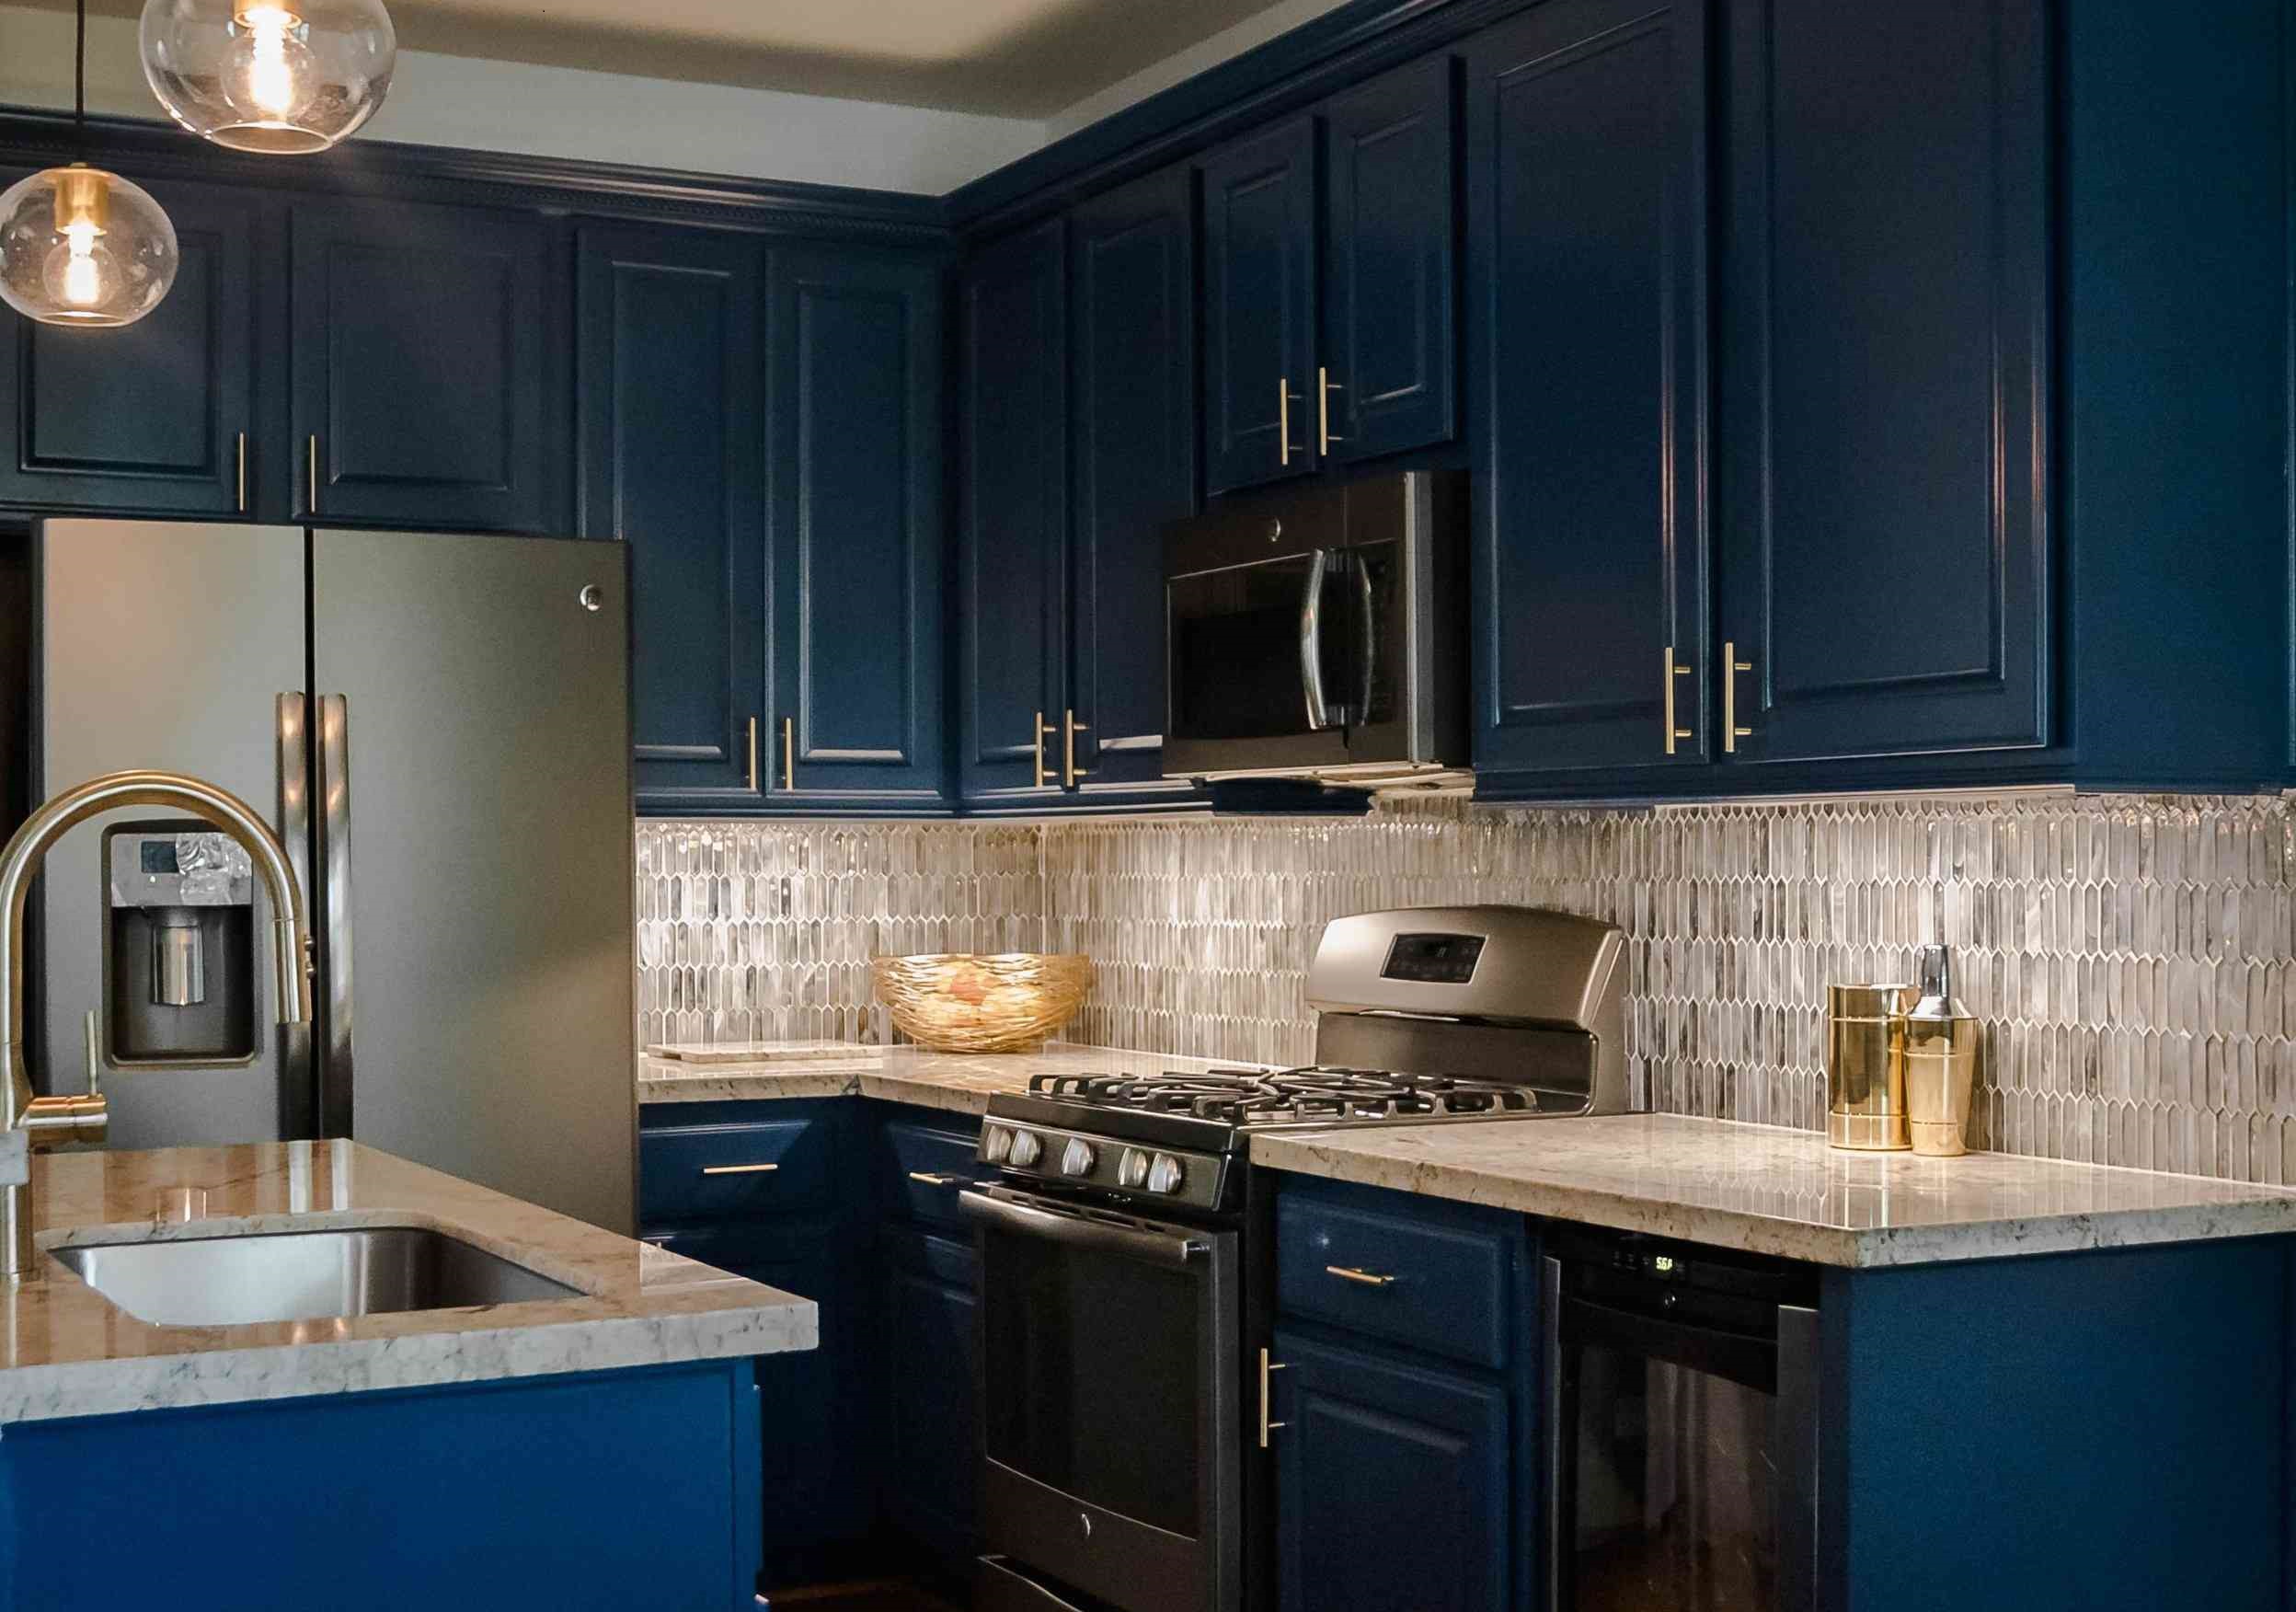 A kitchen with moody blue colors